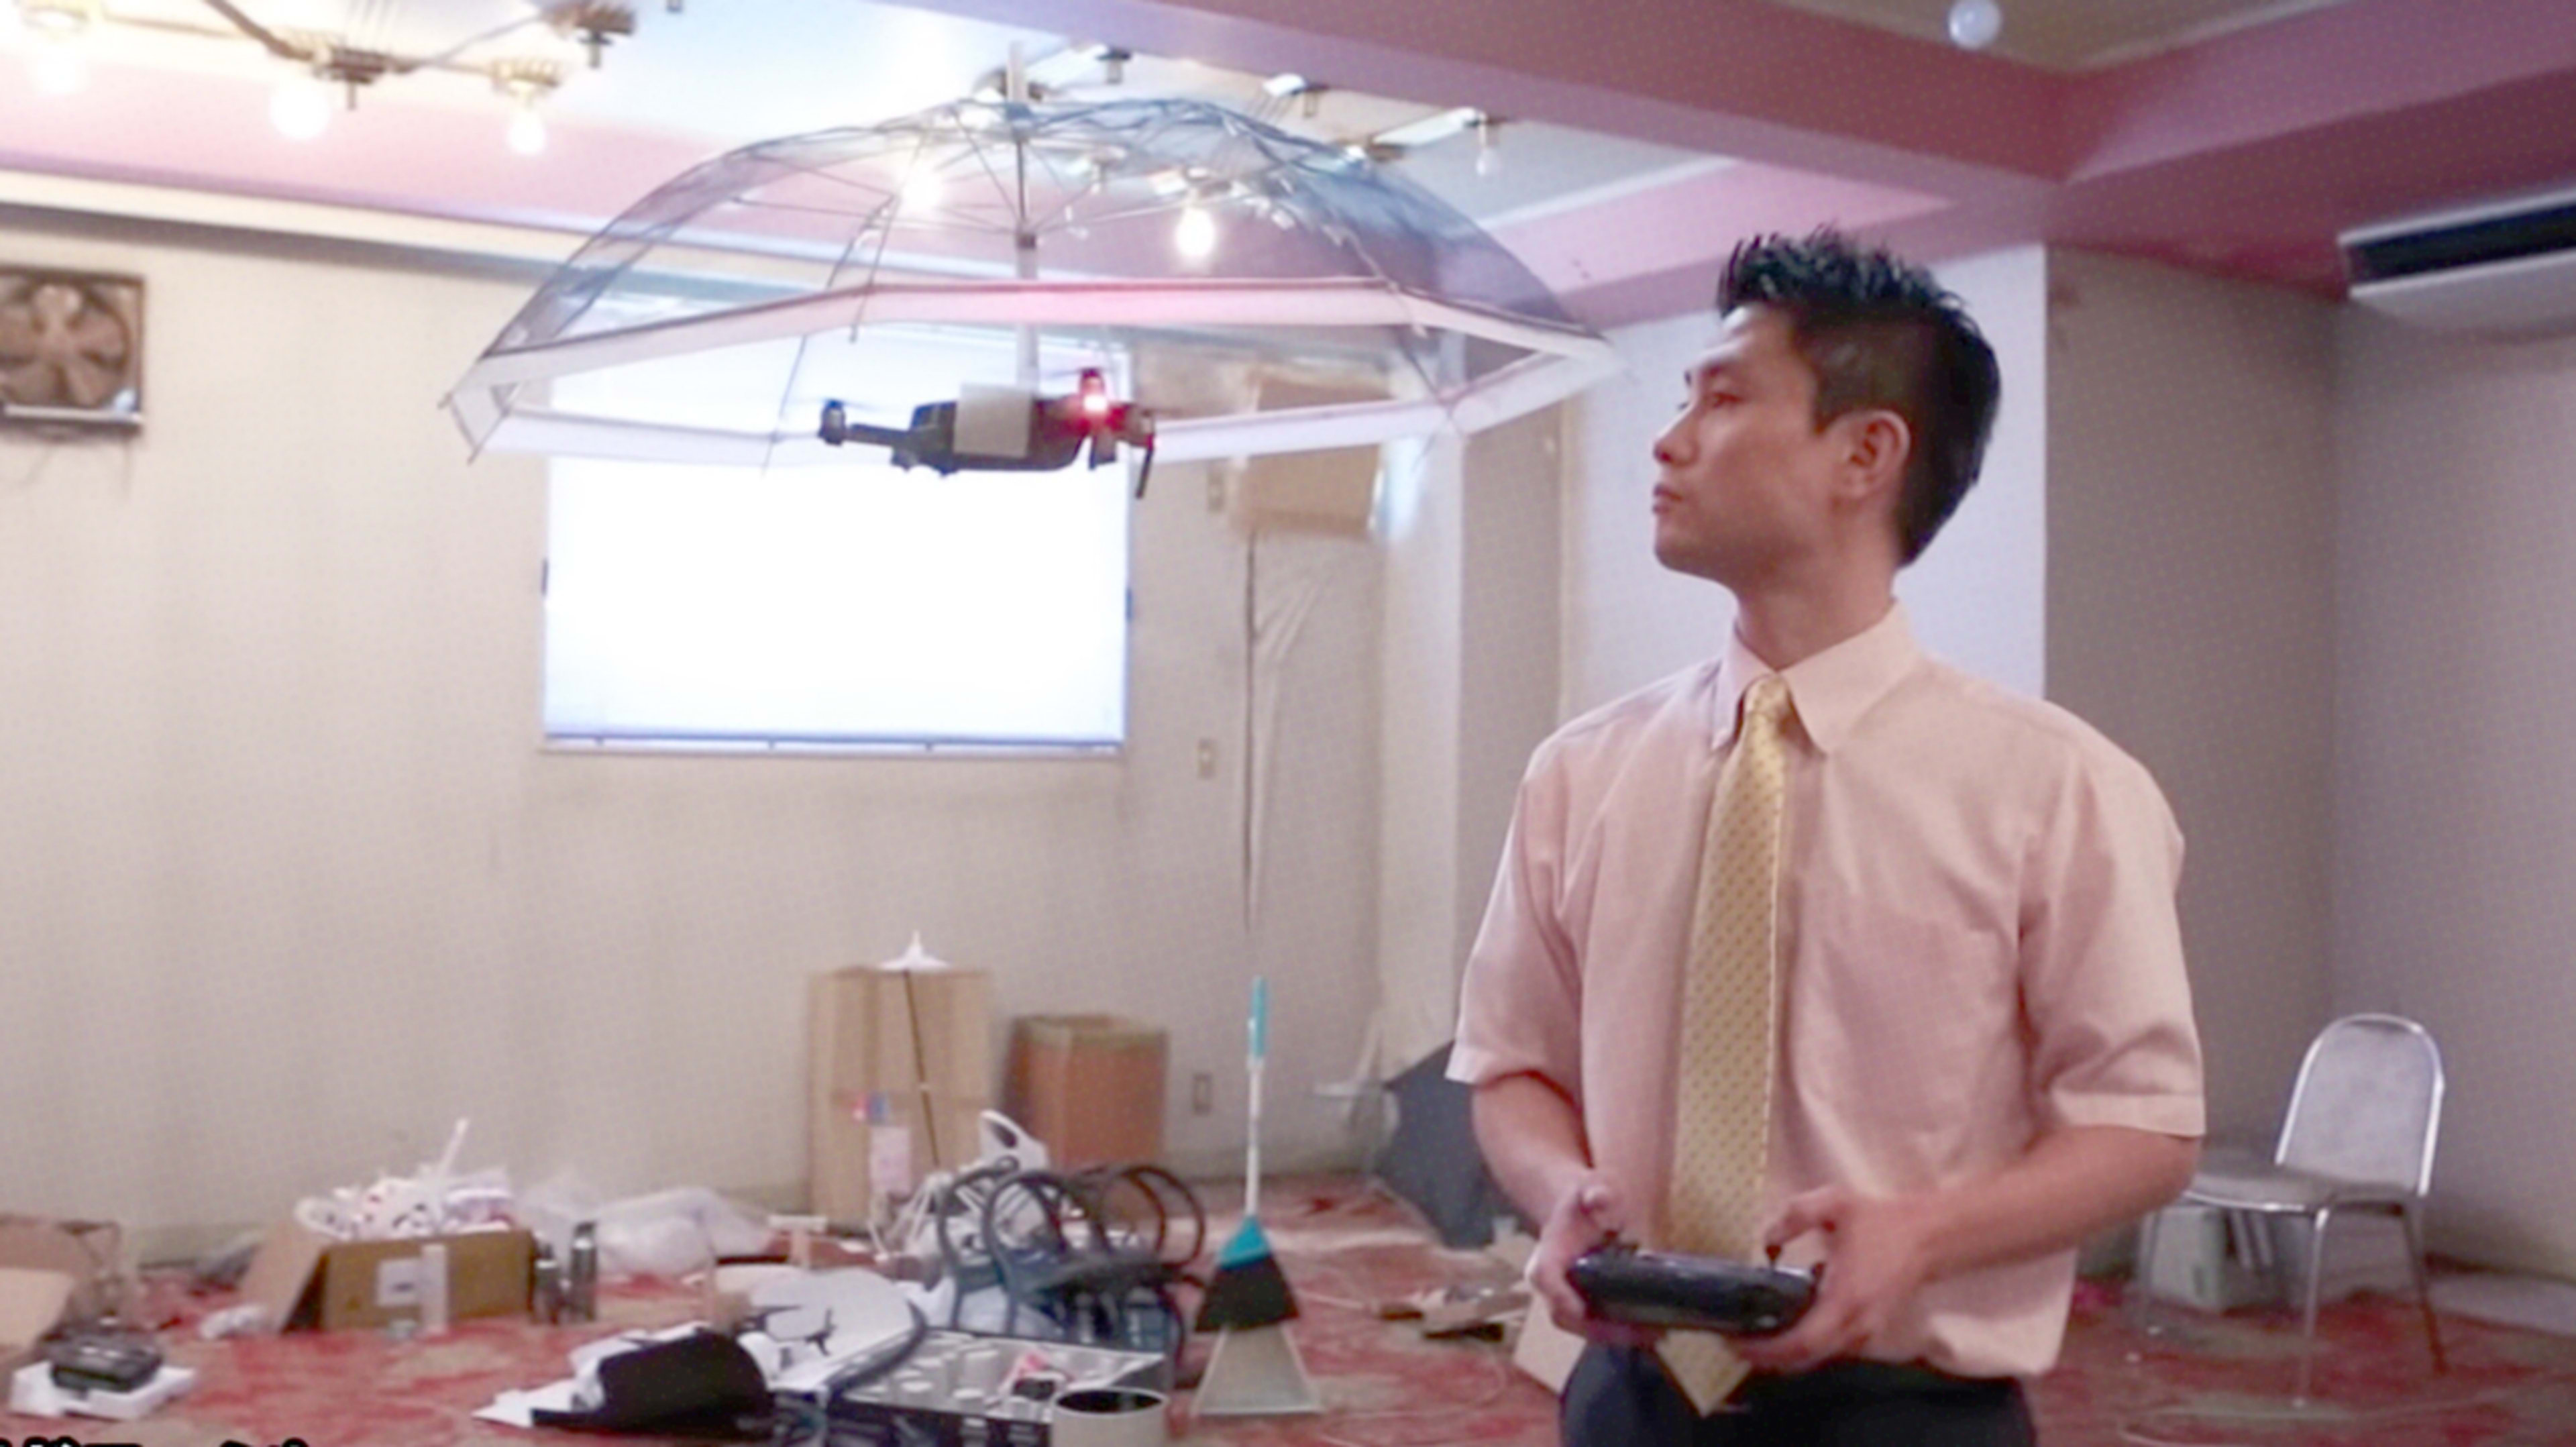 Finally a good use for drones—hands-free umbrellas